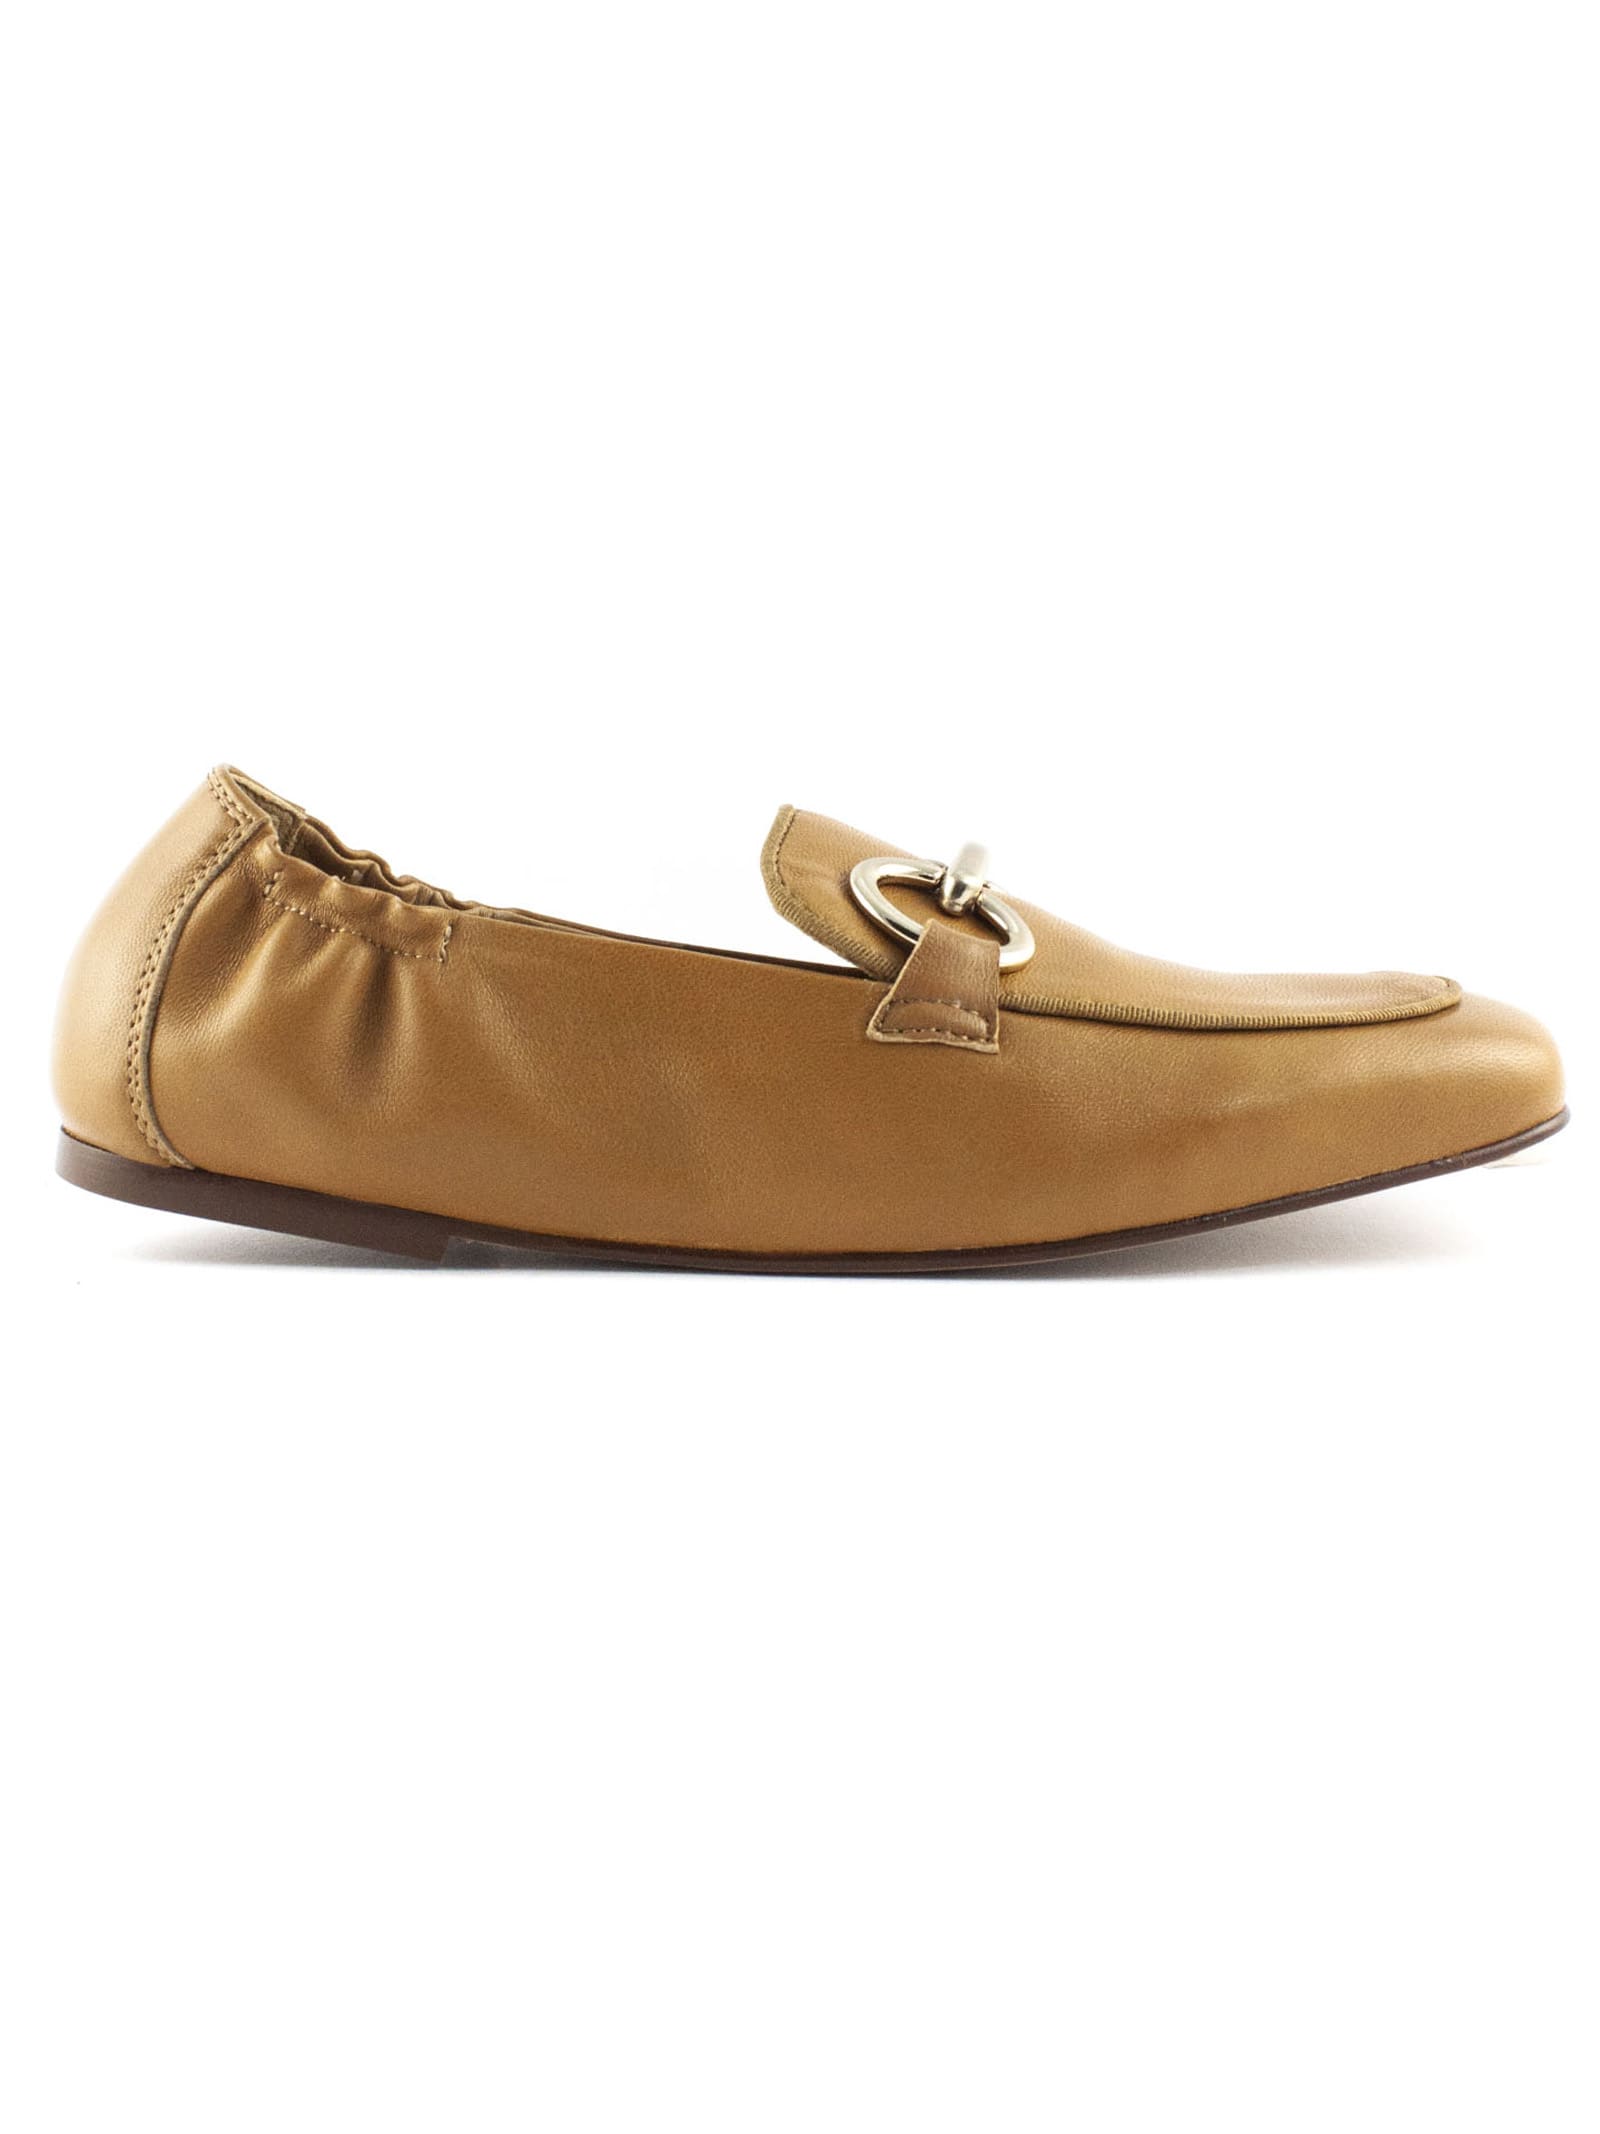 Pedro Miralles Brown Leather Loafer